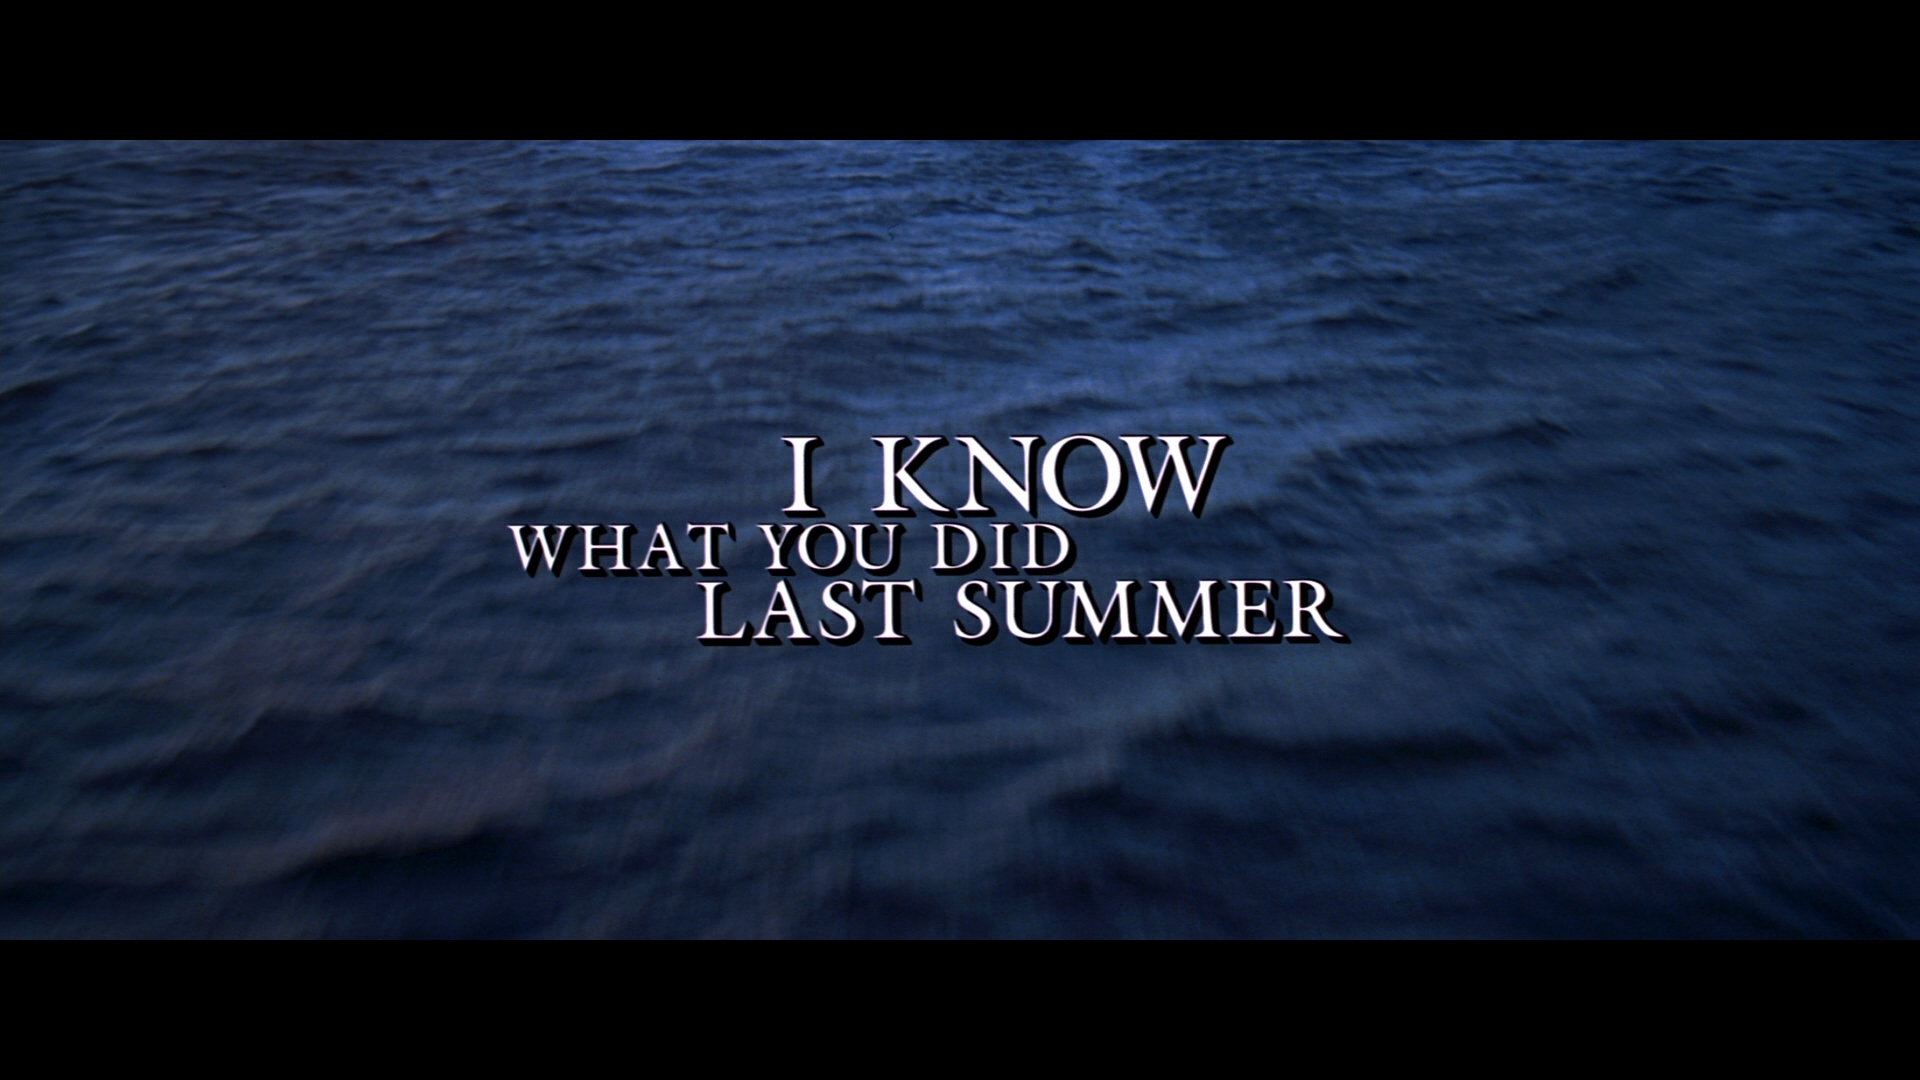 What did you do this summer. I know what you did last Summer. Я знаю что вы сделали прошлым летом. I know what you did. I know what you did last Summer, 1997 арты.